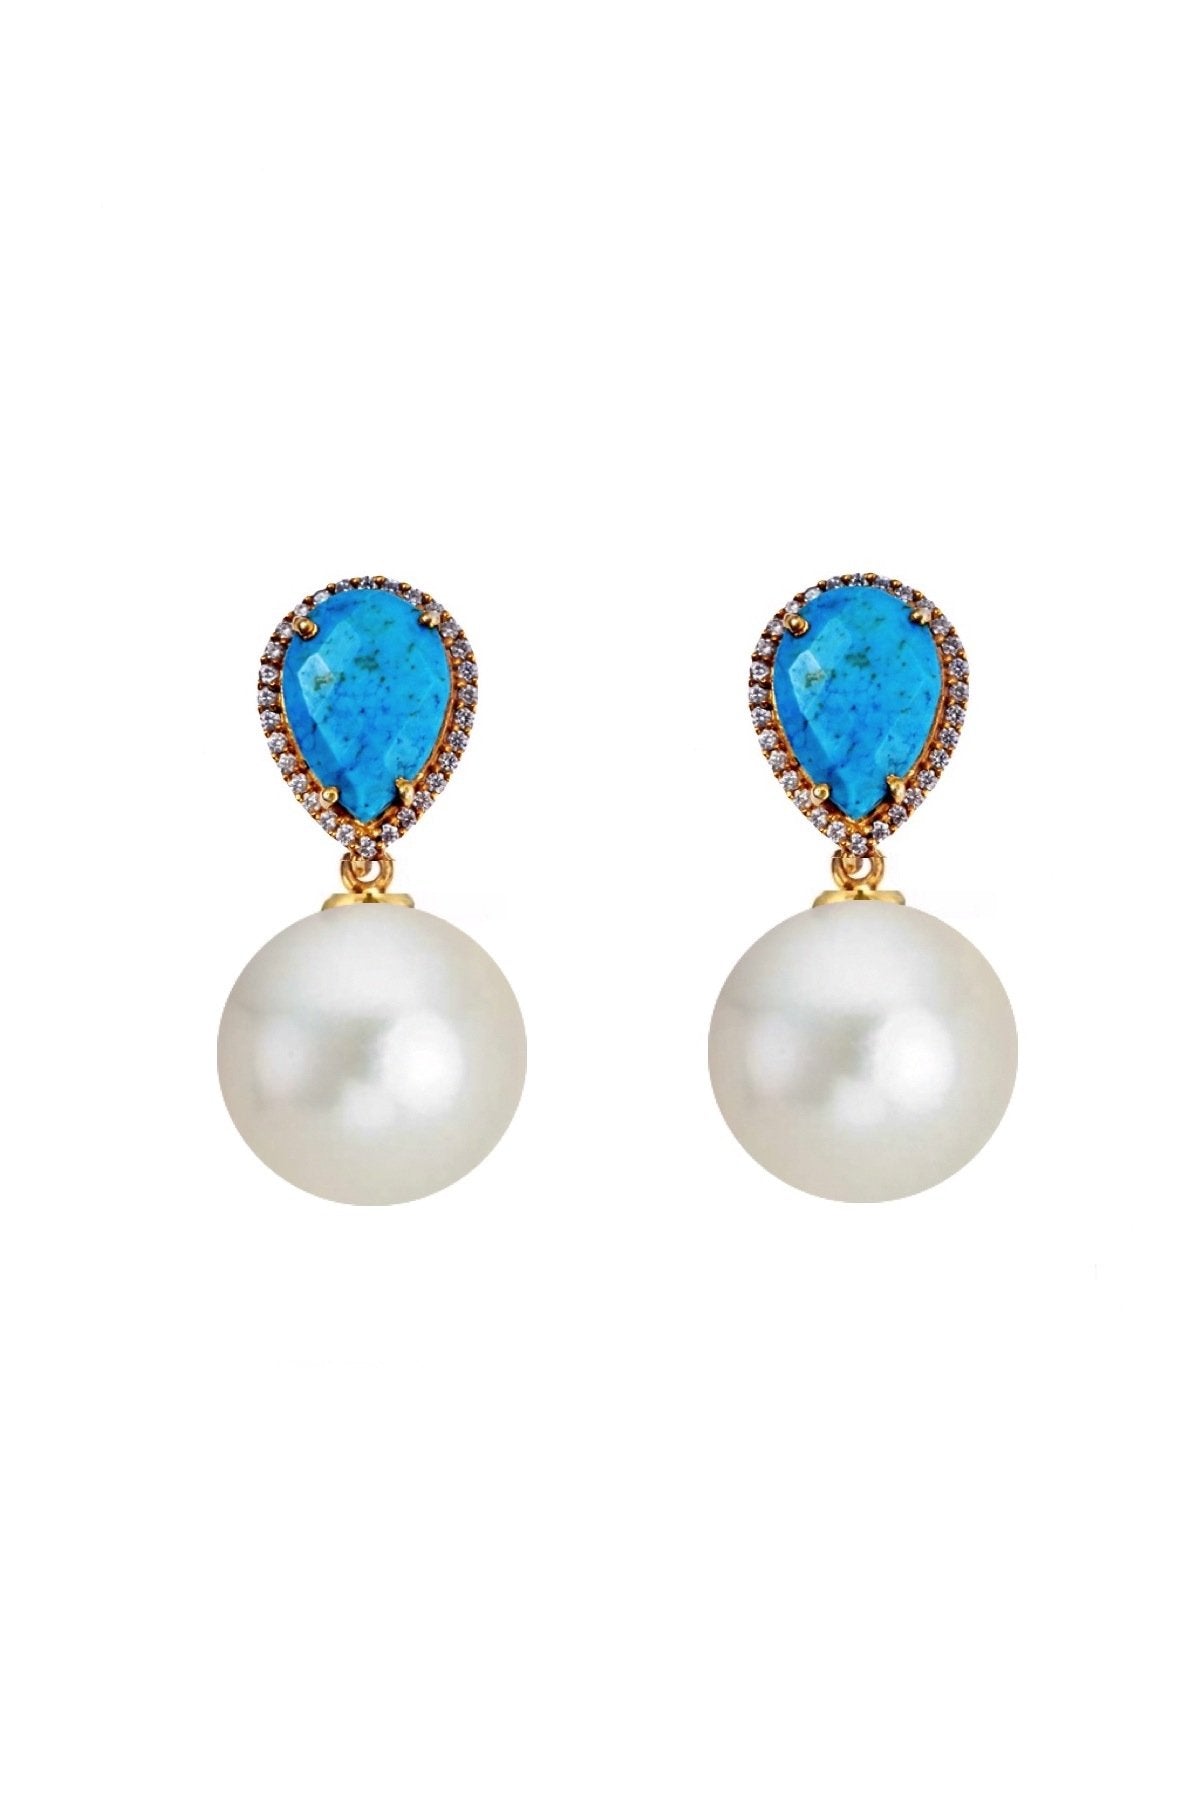 18K Gold Turquoise Embelished Pearl Drop Earrings